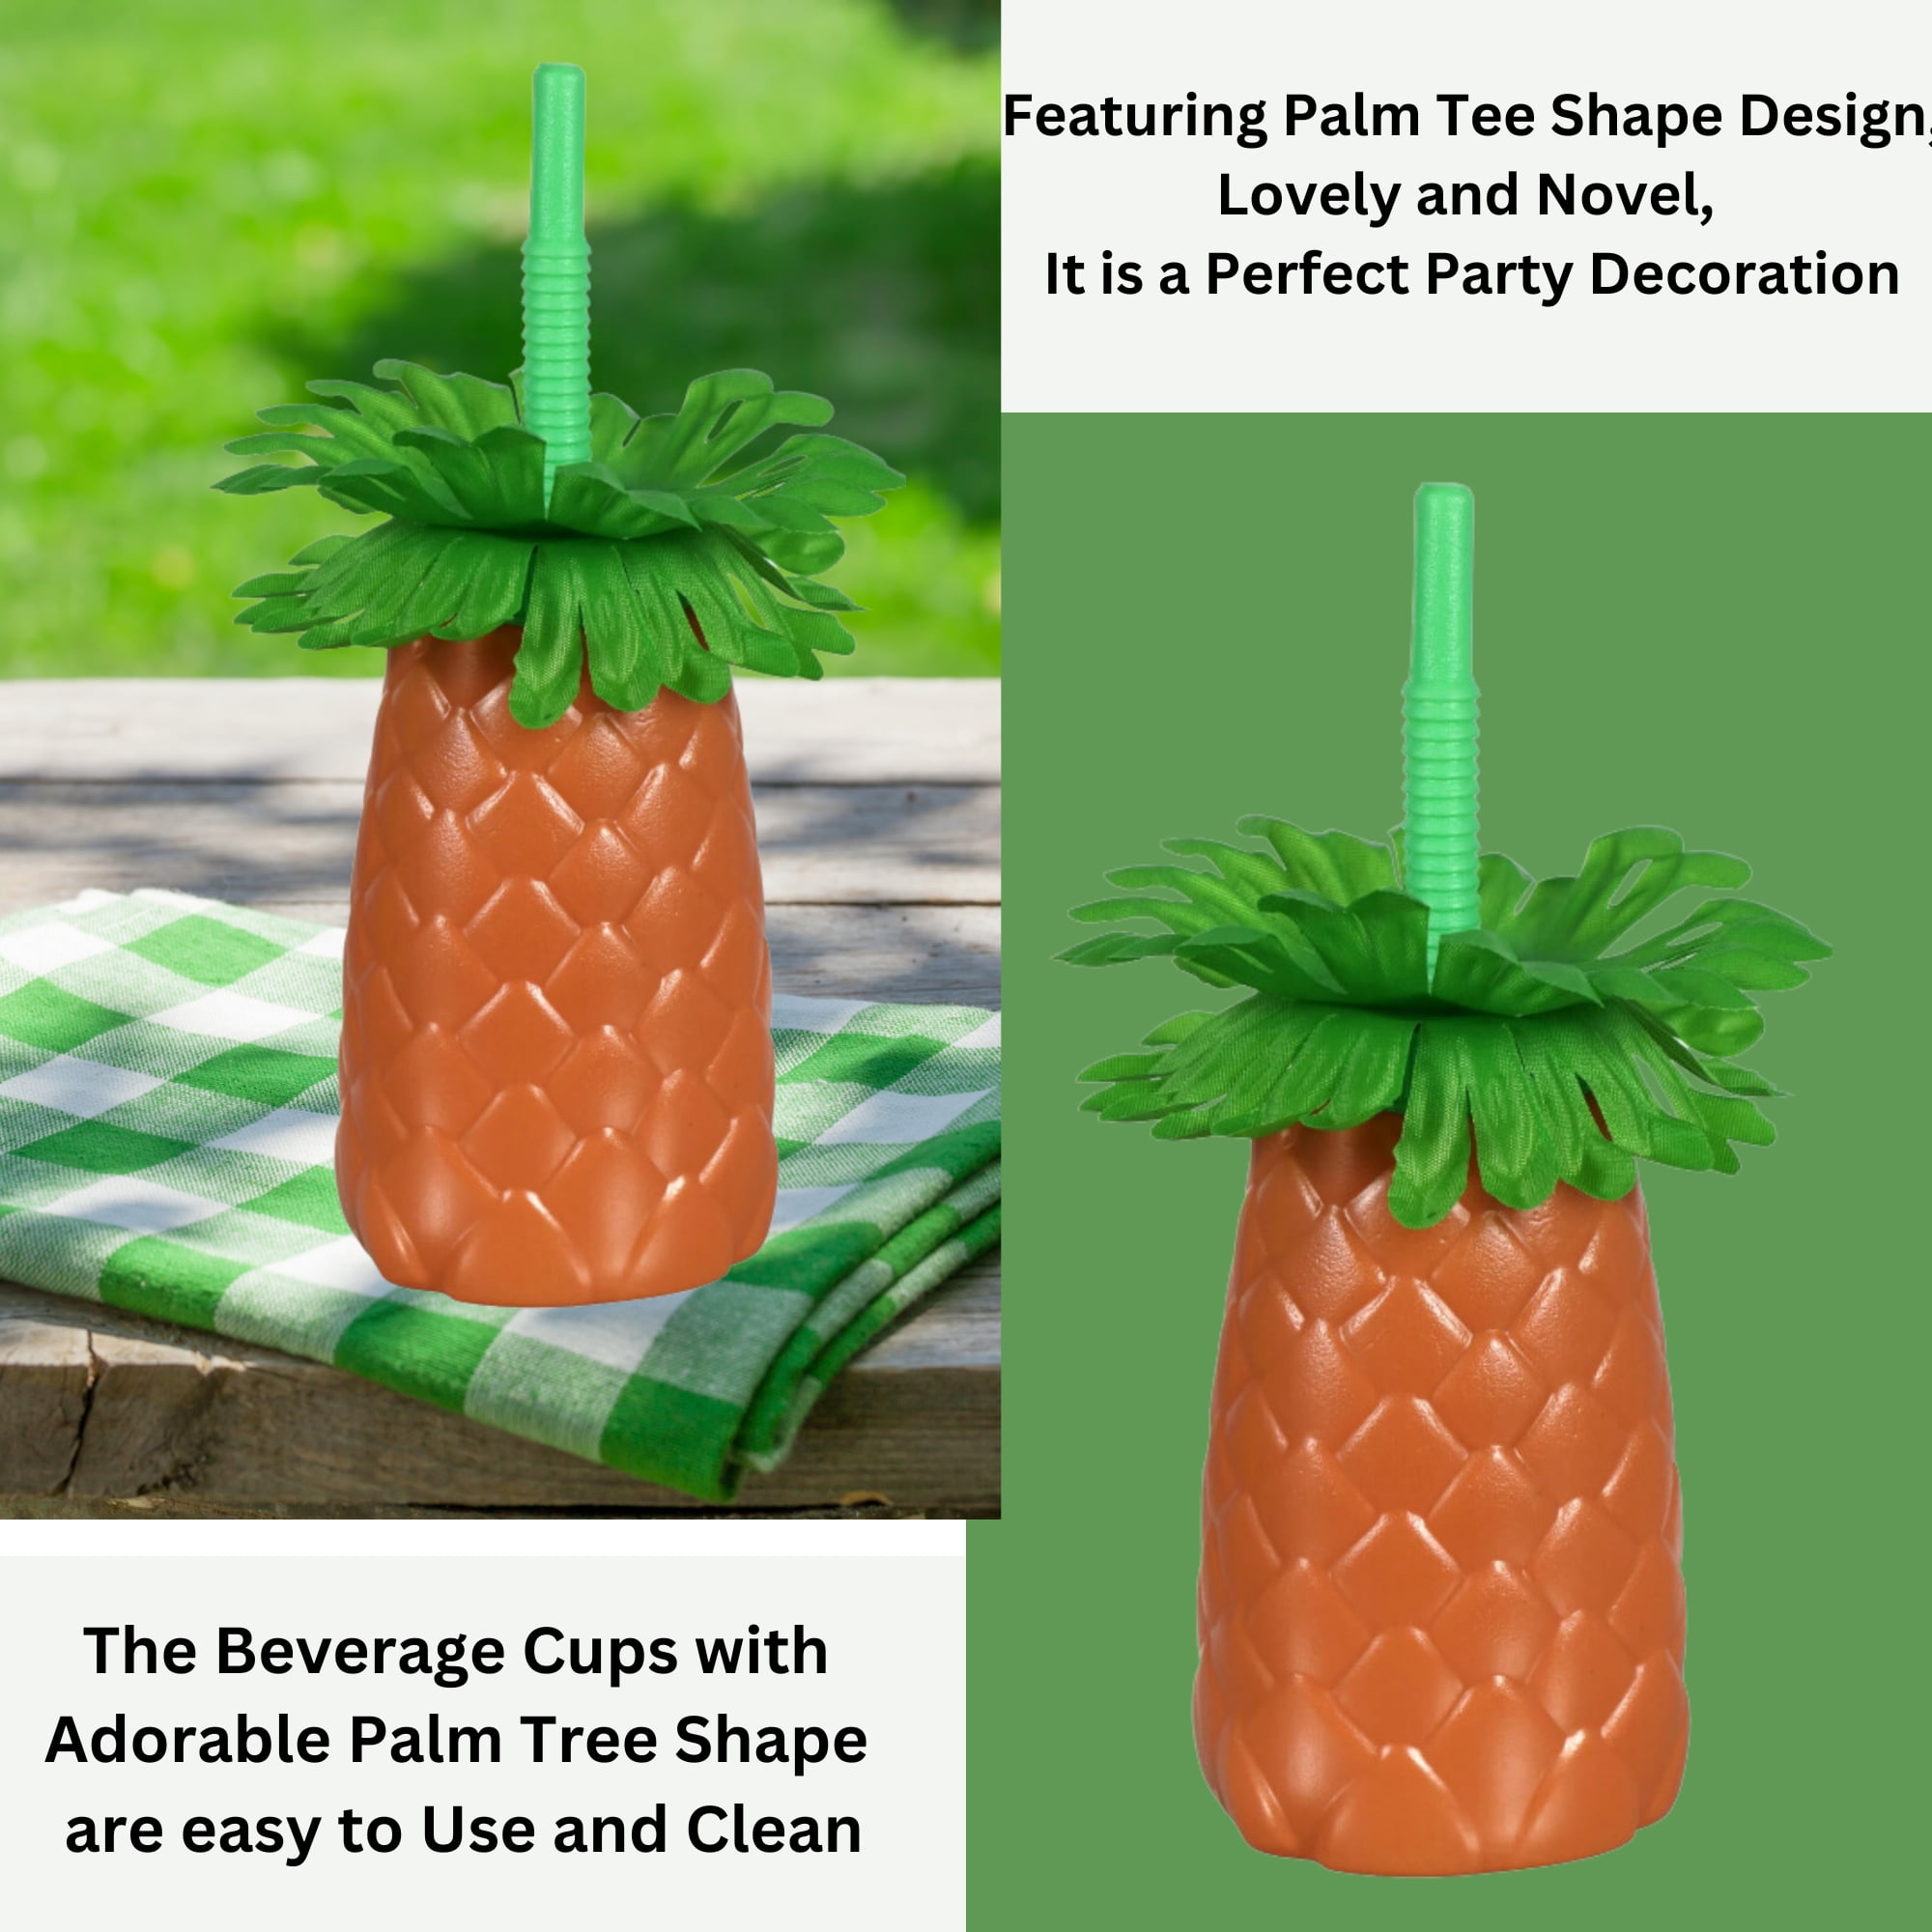 Palm Tree Yard Cup - 17 oz. (Box of 54 Cups) - Clear Cup with Yellow Palm Lids and Straws